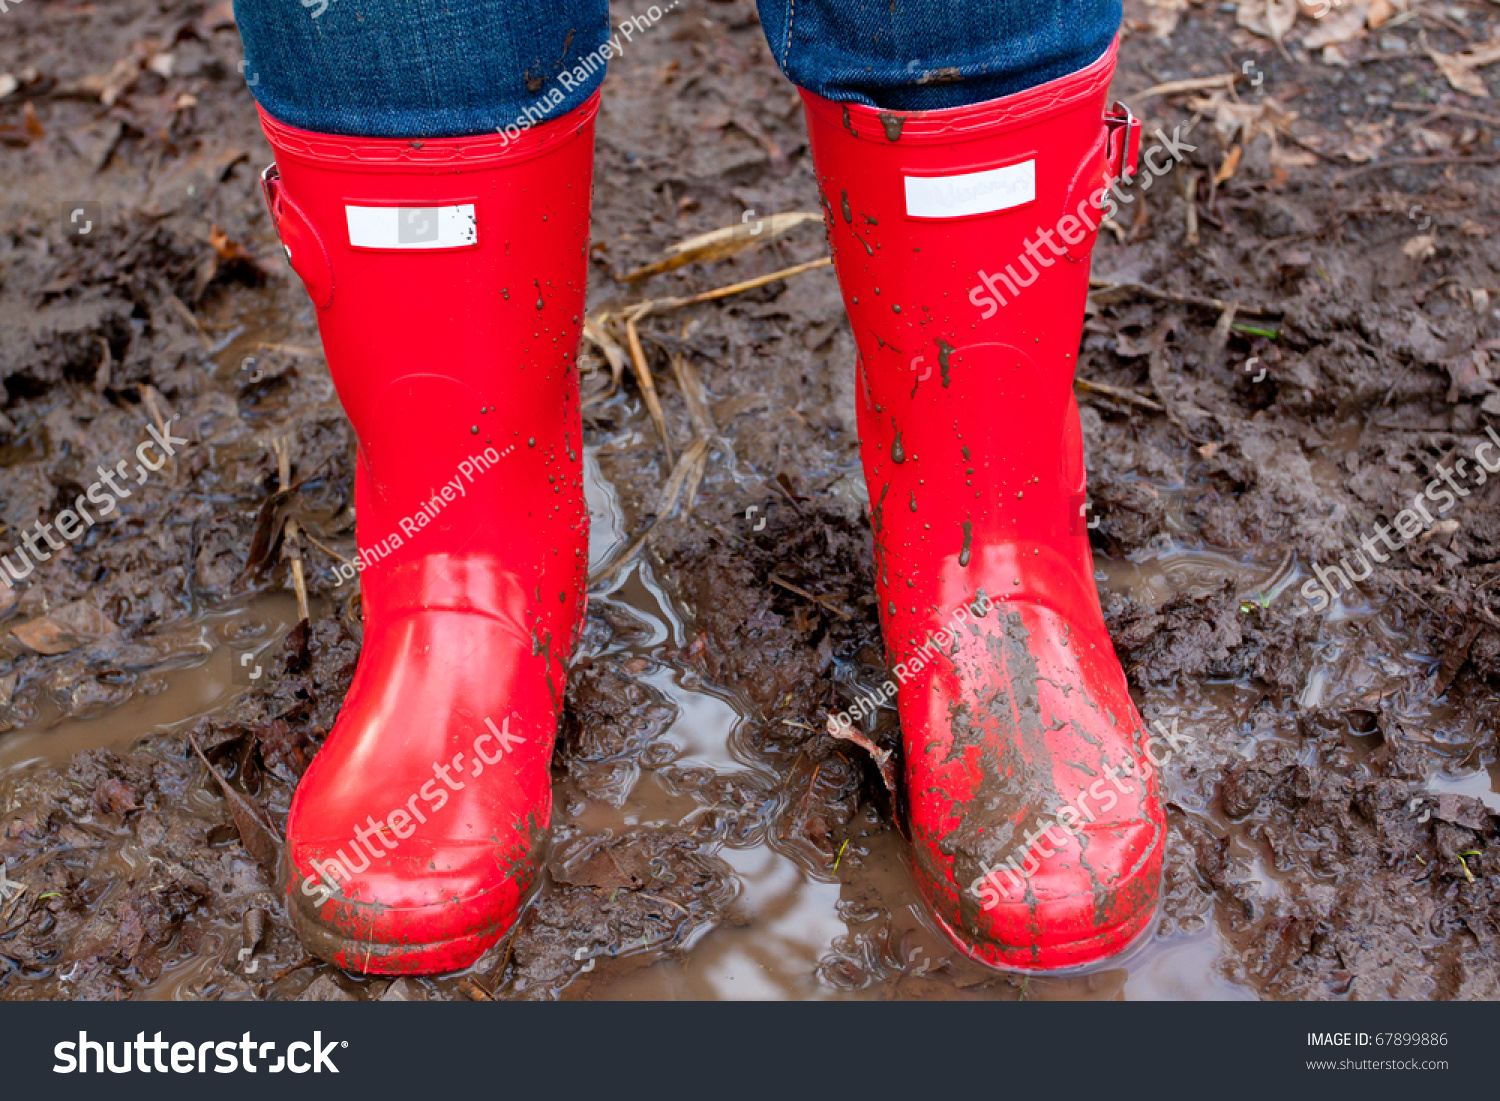 Red Rain Boots On The Legs Of A Girl After She Played In The Mud And ...